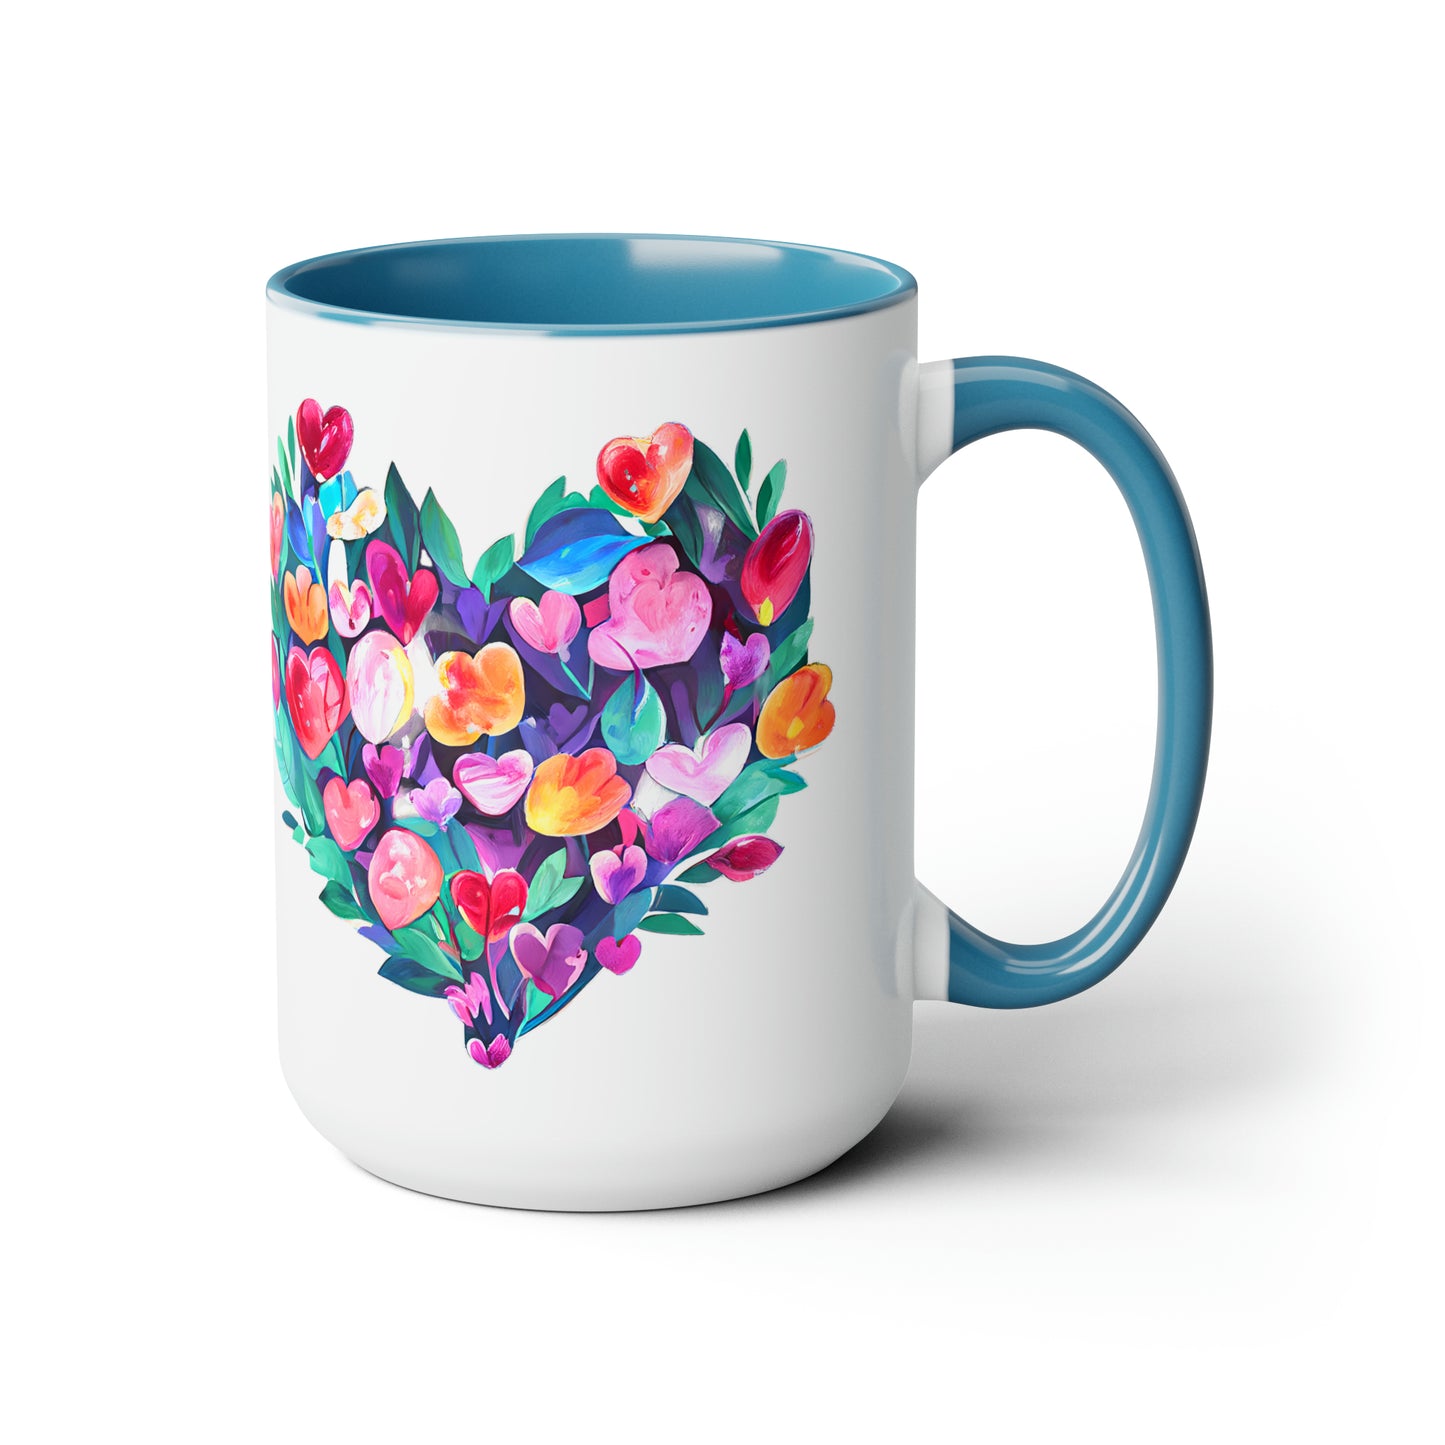 A Sweet Friendship Refreshes the Soul Two-Tone Coffee Mugs, Large 15oz, Coffee Mug, Coffee Cup, Gifts For Friend, Friendship Gift, Drink Mug